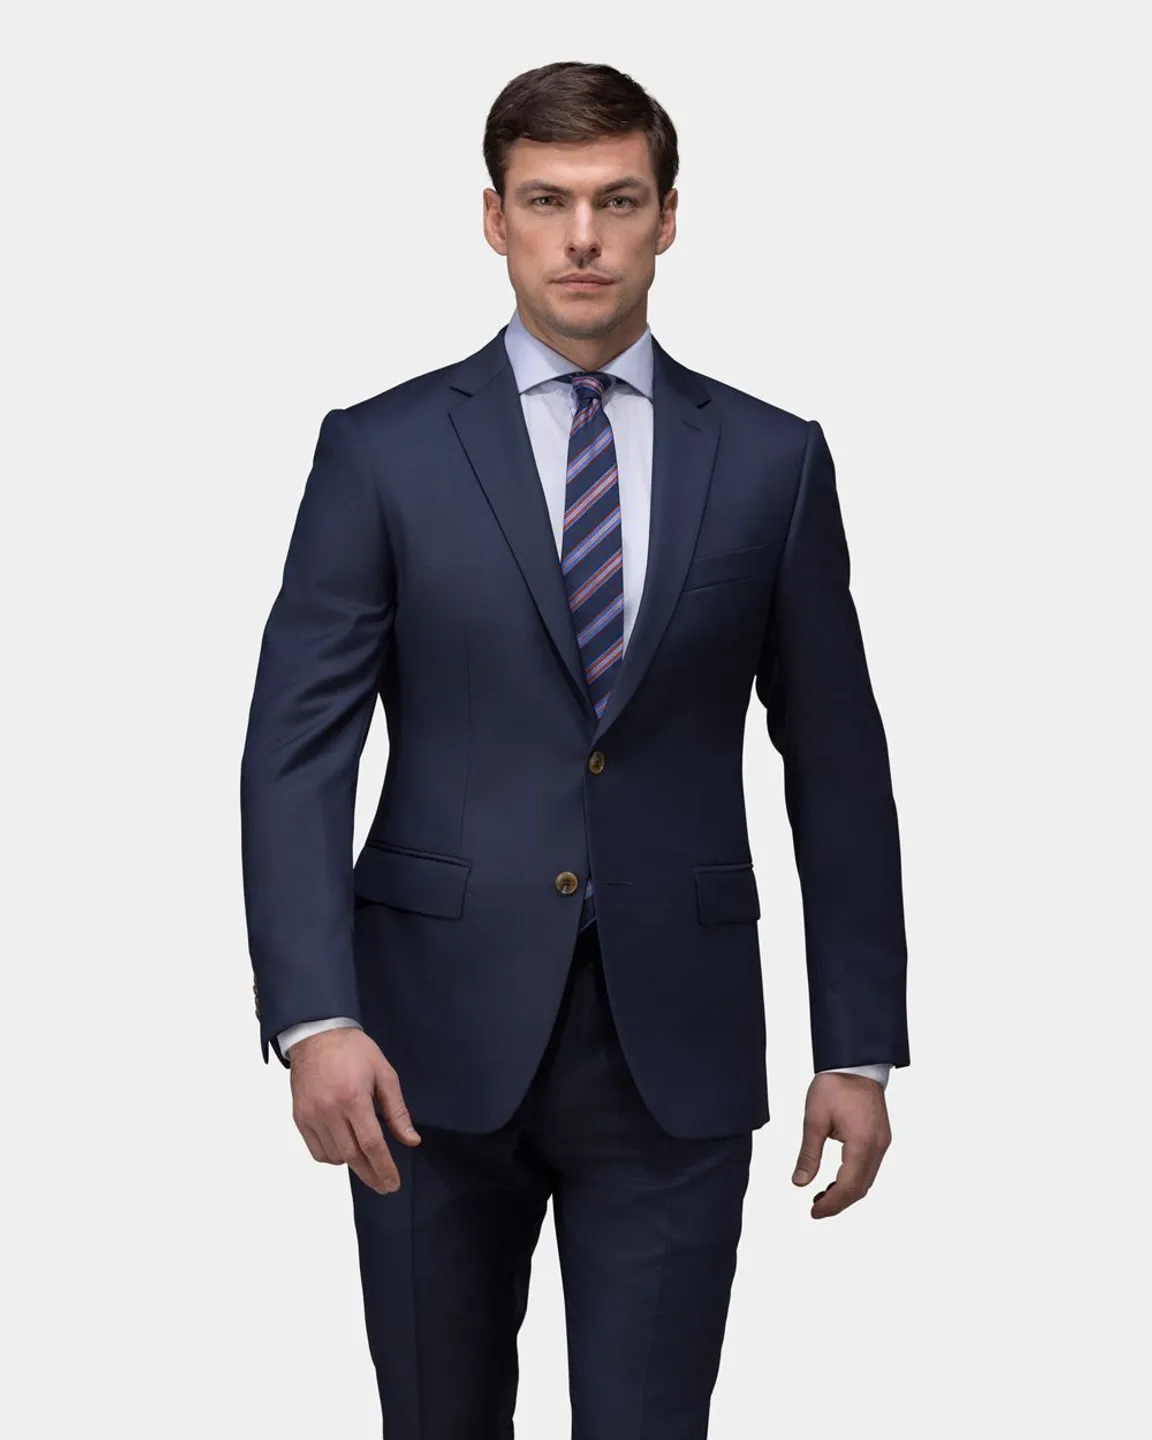 Navigating the Search: Tips for Finding a Trustworthy Suit Tailor